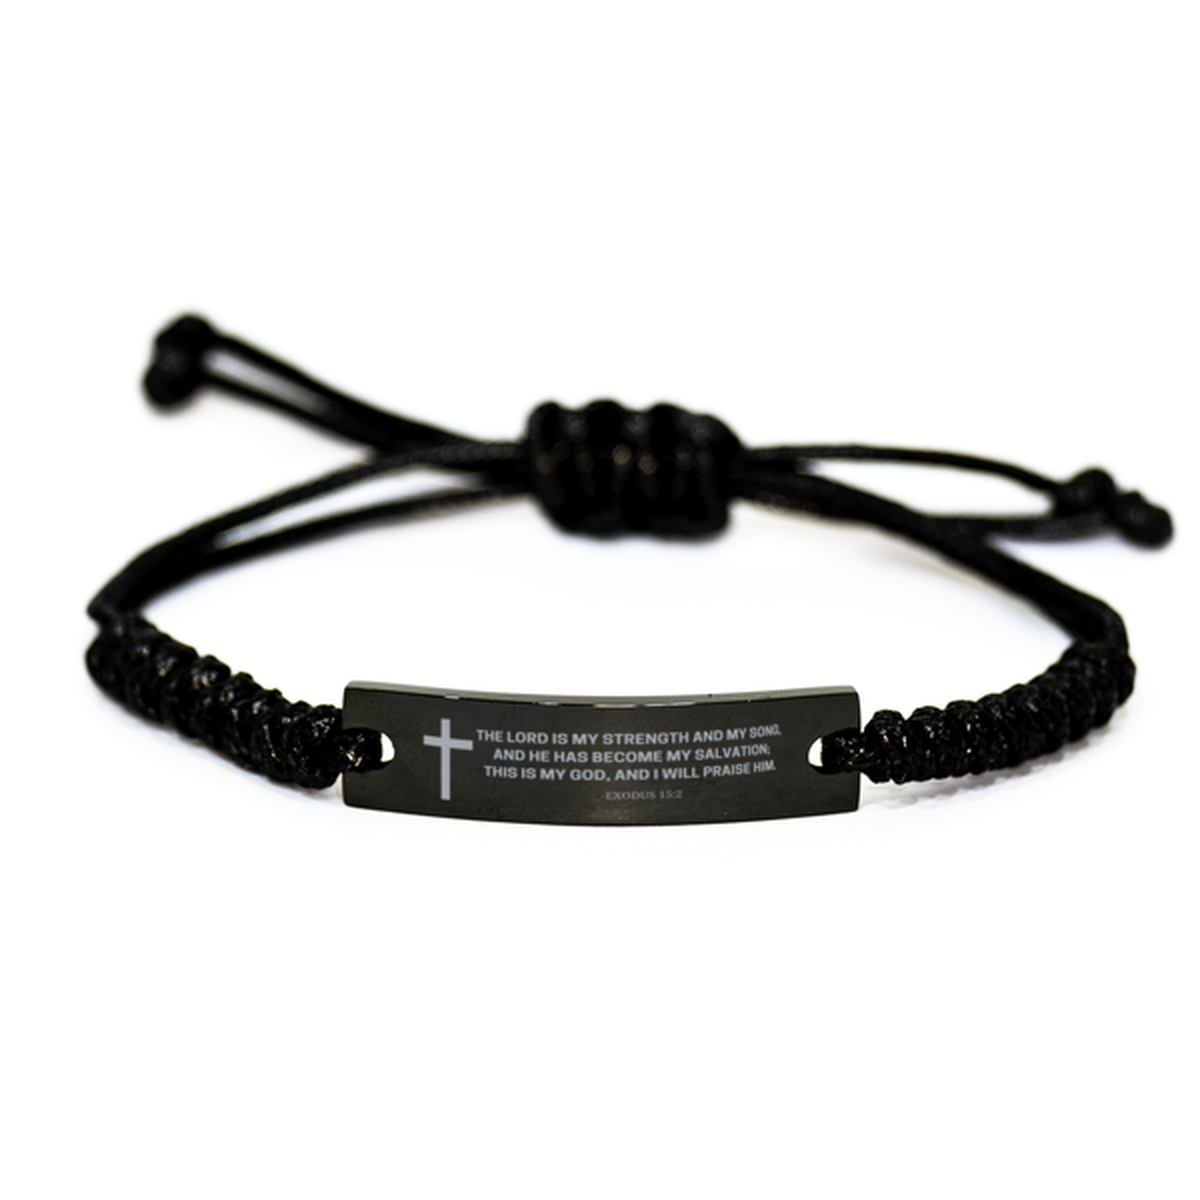 Baptism Gifts For Teenage Boys Girls, Christian Bible Verse Black Rope Bracelet, The Lord is my strength, Catholic Confirmation Gifts for Son, Godson, Grandson, Nephew